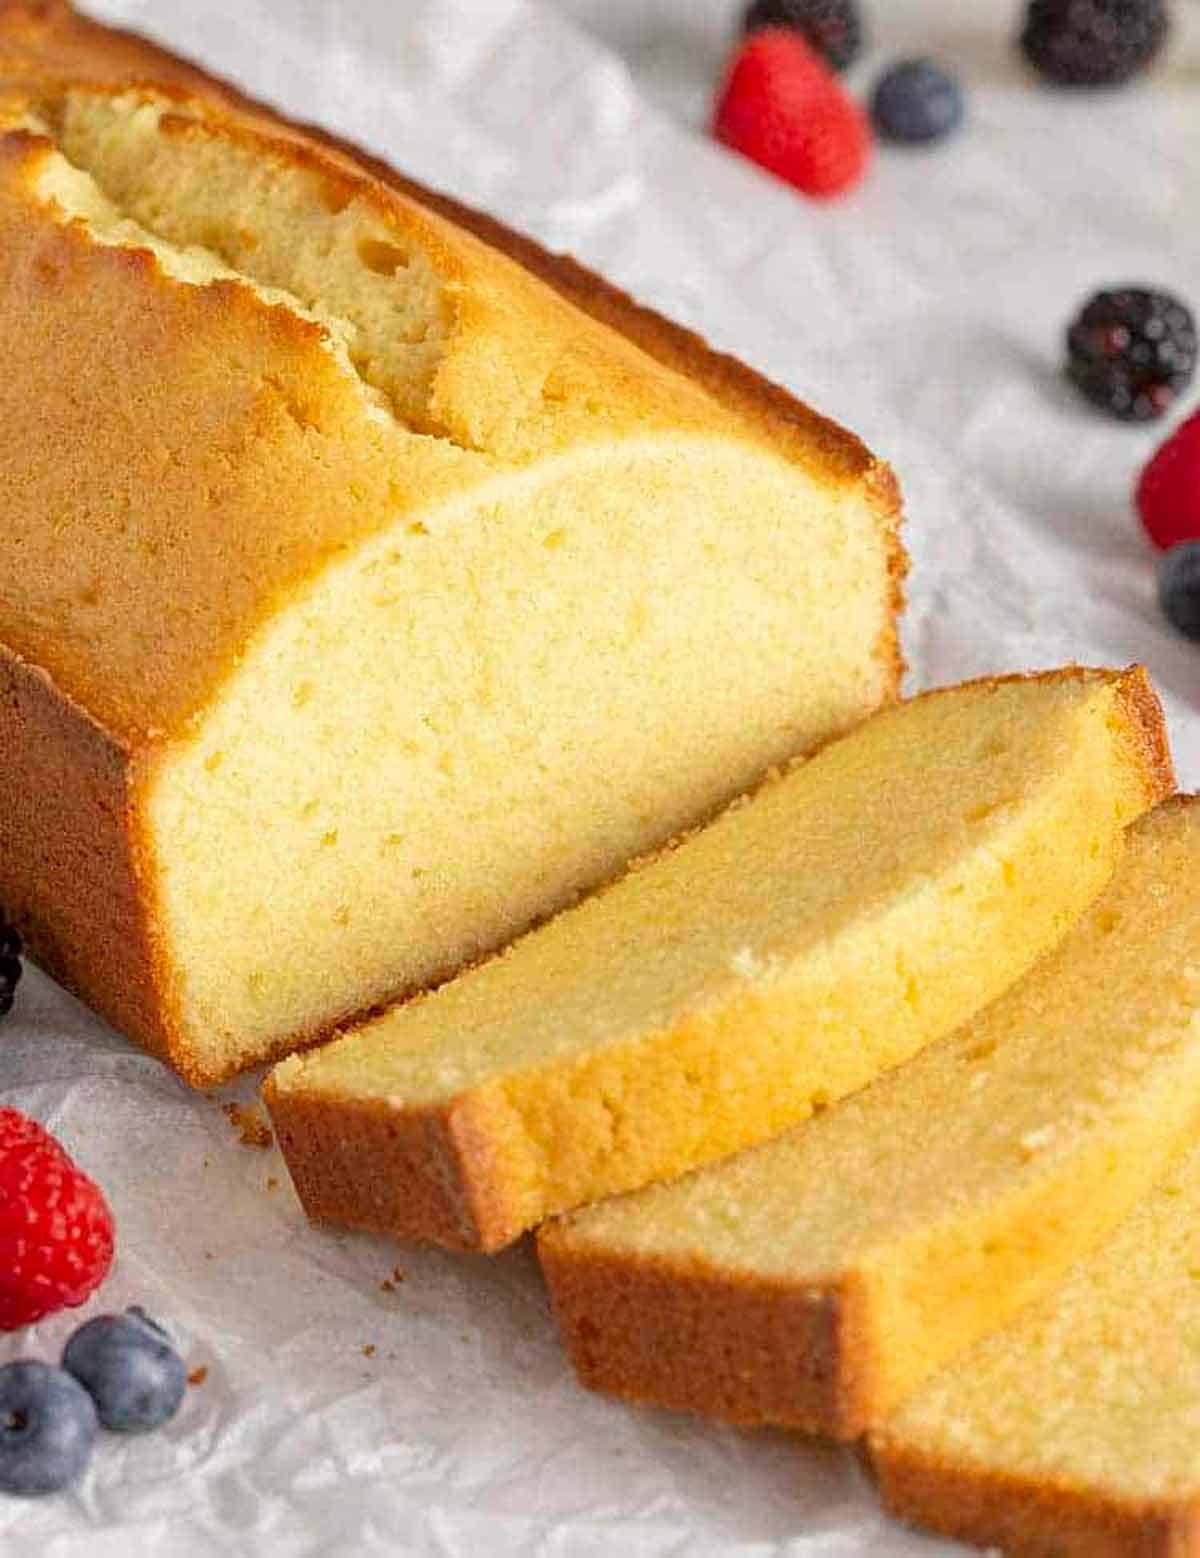 A loaf of pound cake with three slices cut and laid in front.